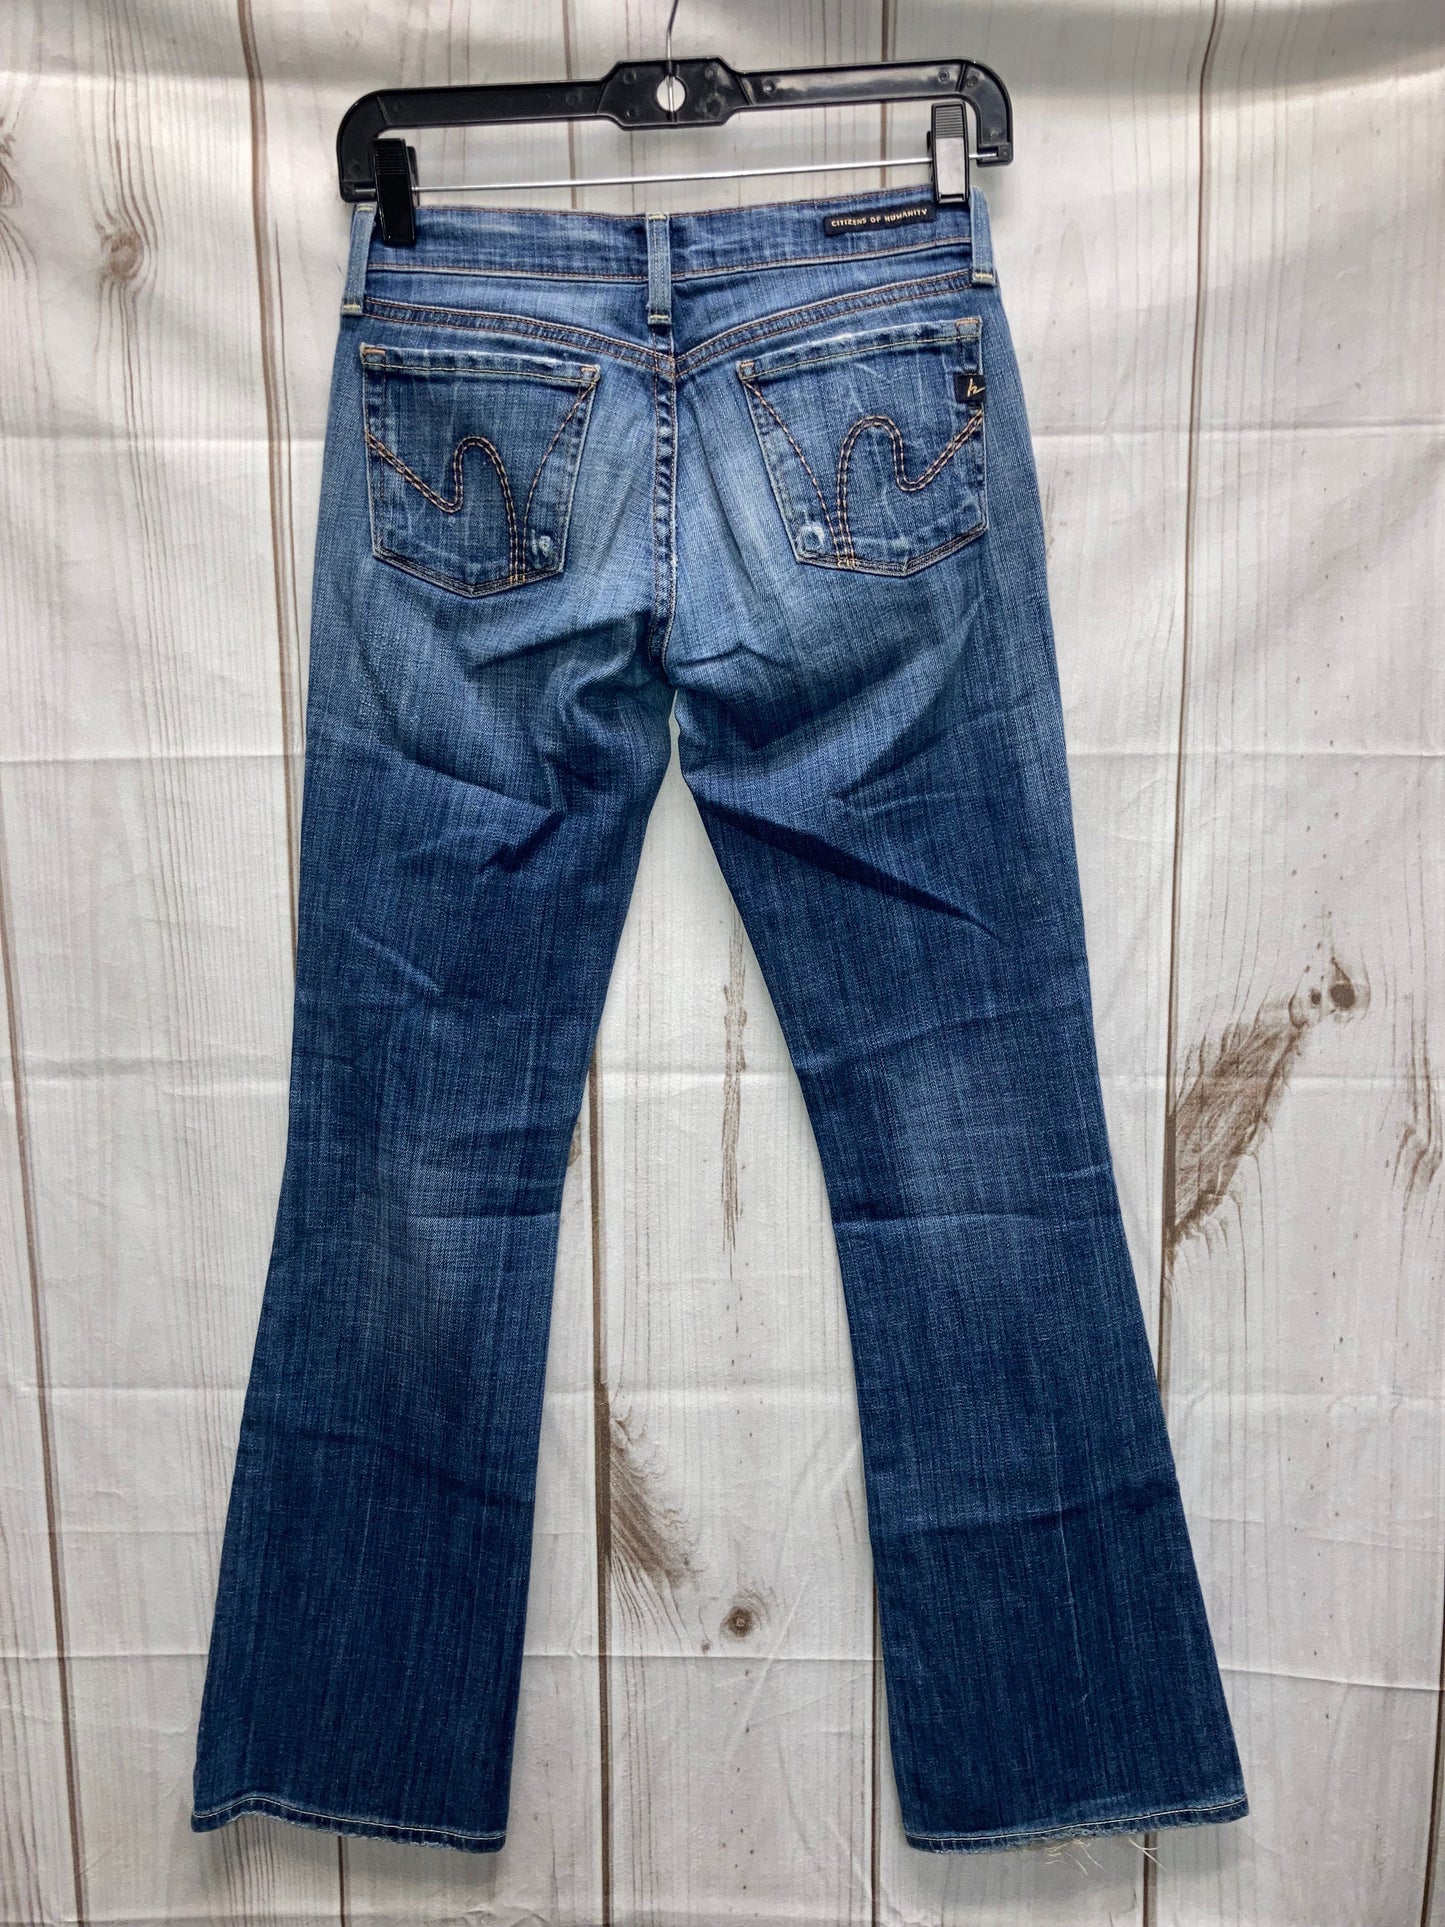 Jeans Skinny By Citizens Of Humanity  Size: 0